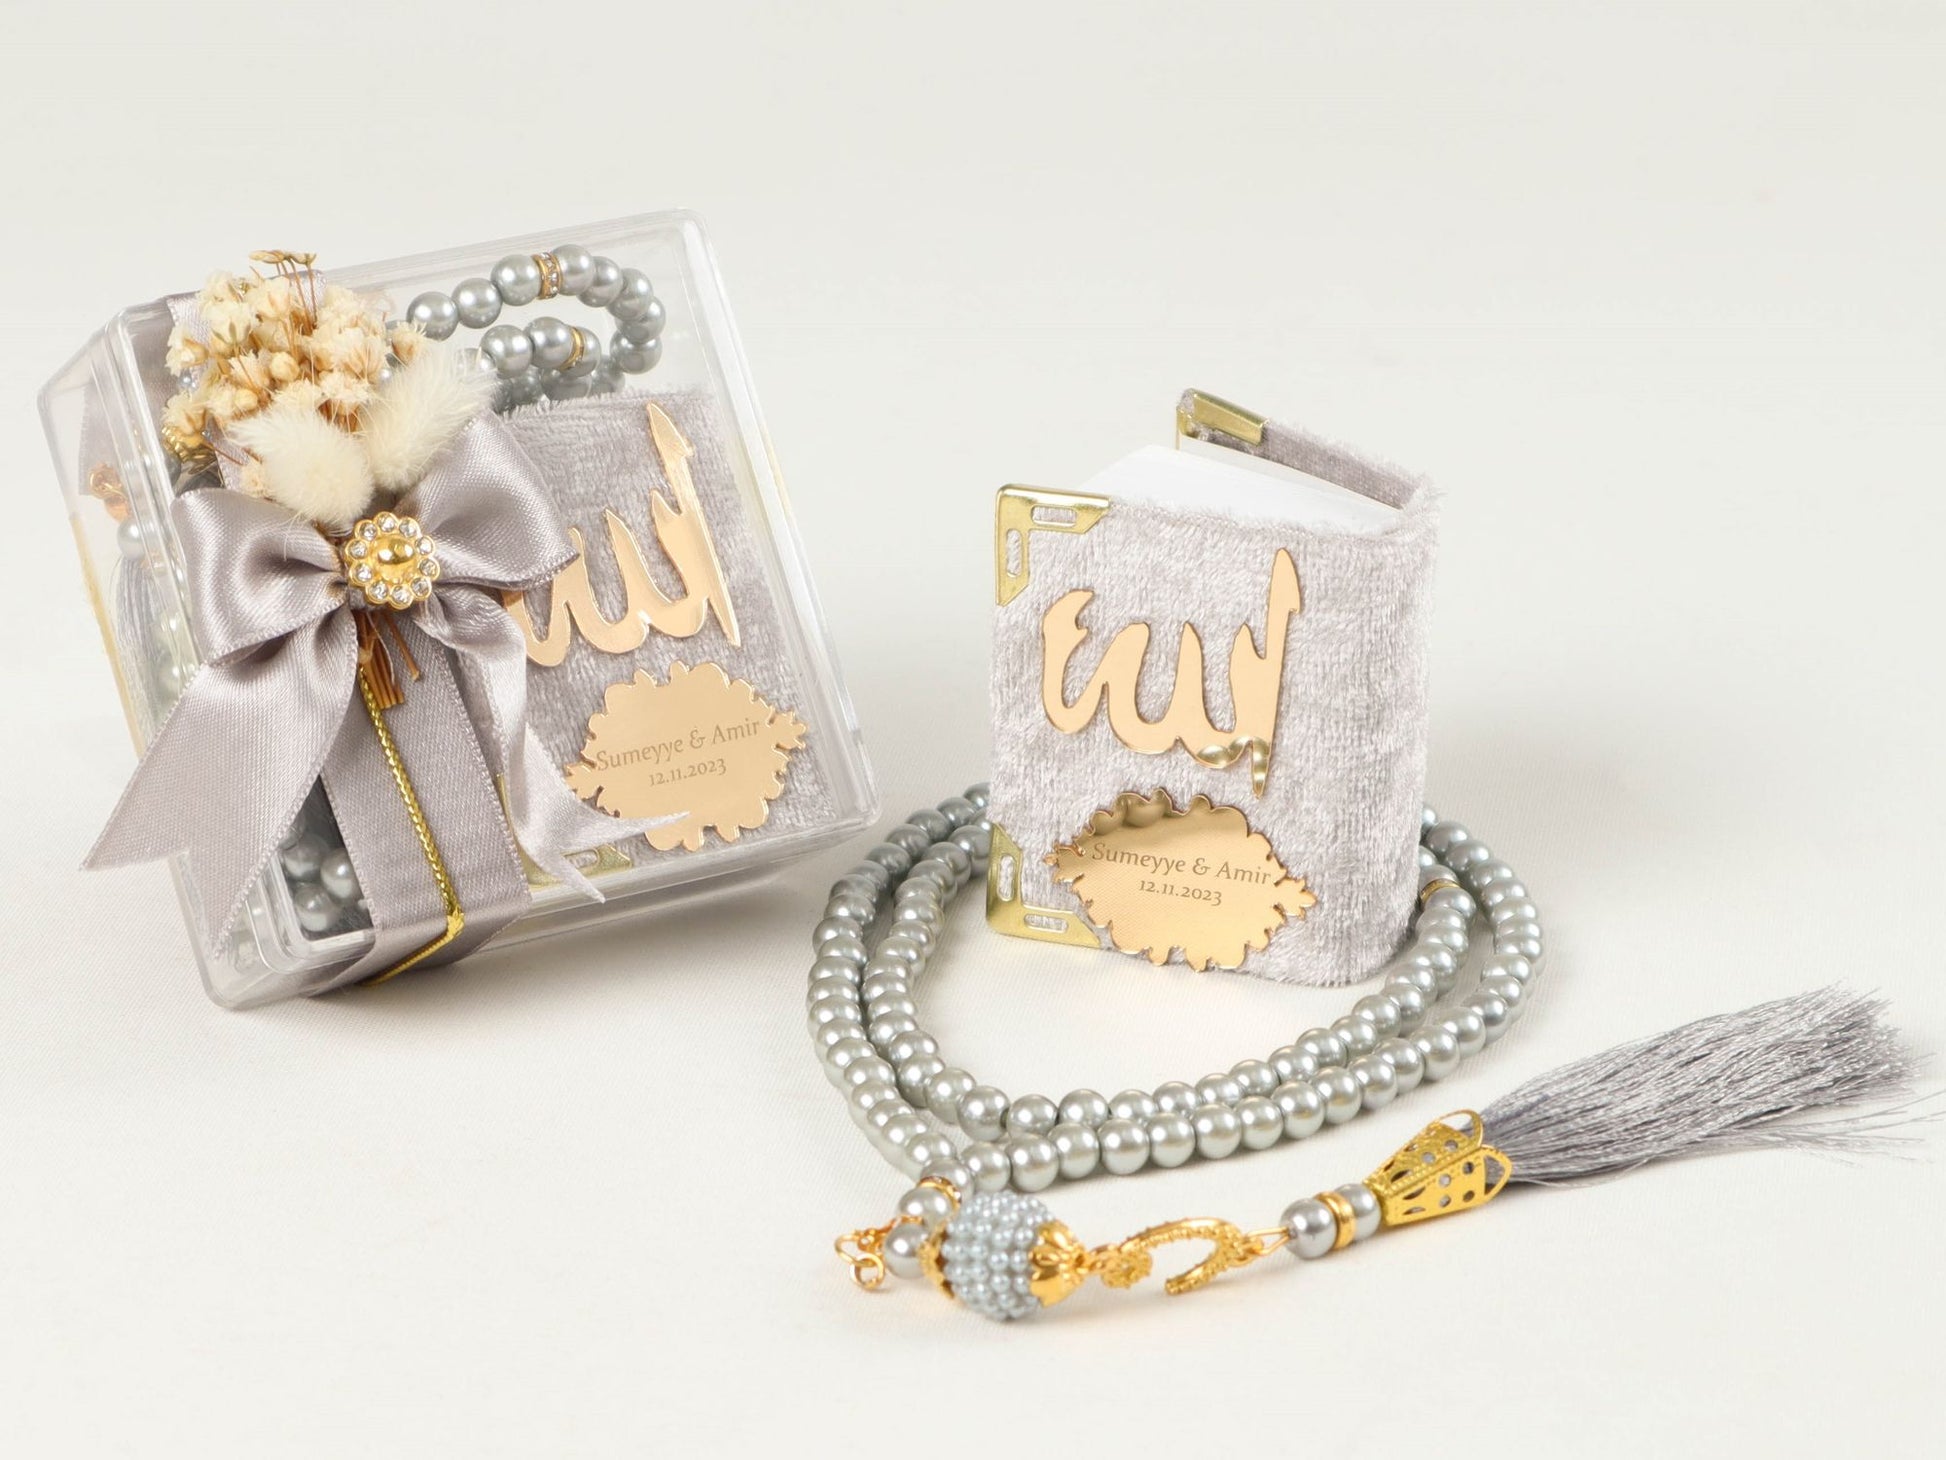 Personalized Mini Quran Prayer Beads Flower with Pearl Wedding Favor - Islamic Elite Favors is a handmade gift shop offering a wide variety of unique and personalized gifts for all occasions. Whether you're looking for the perfect Ramadan, Eid, Hajj, wedding gift or something special for a birthday, baby shower or anniversary, we have something for everyone. High quality, made with love.